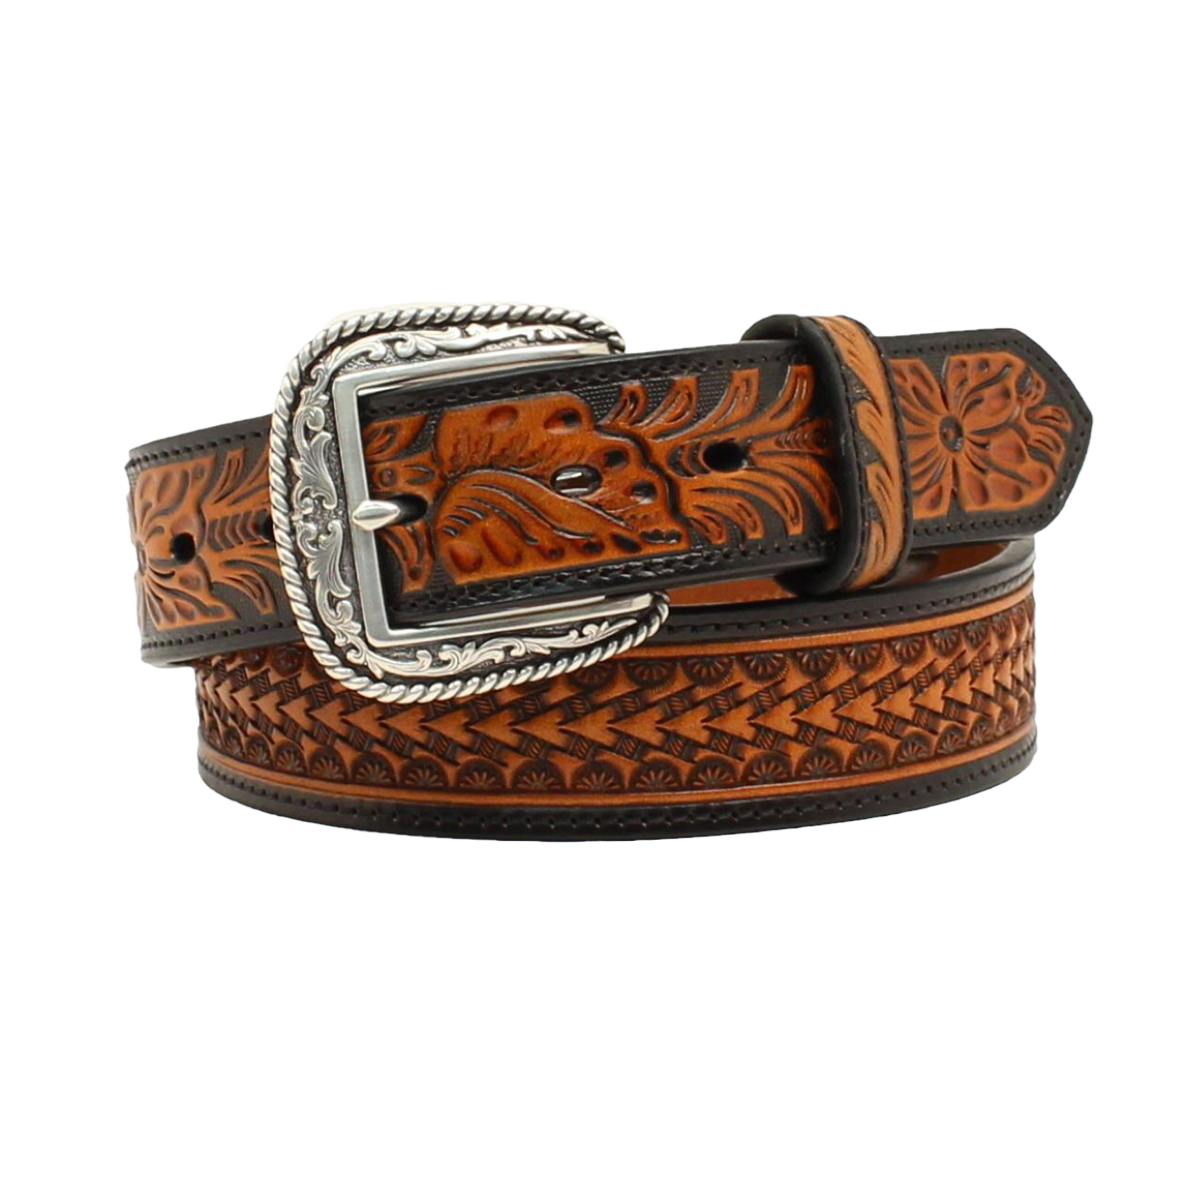 Ariat Men's Floral Embossed Black and Tan Leather Belt A1020867